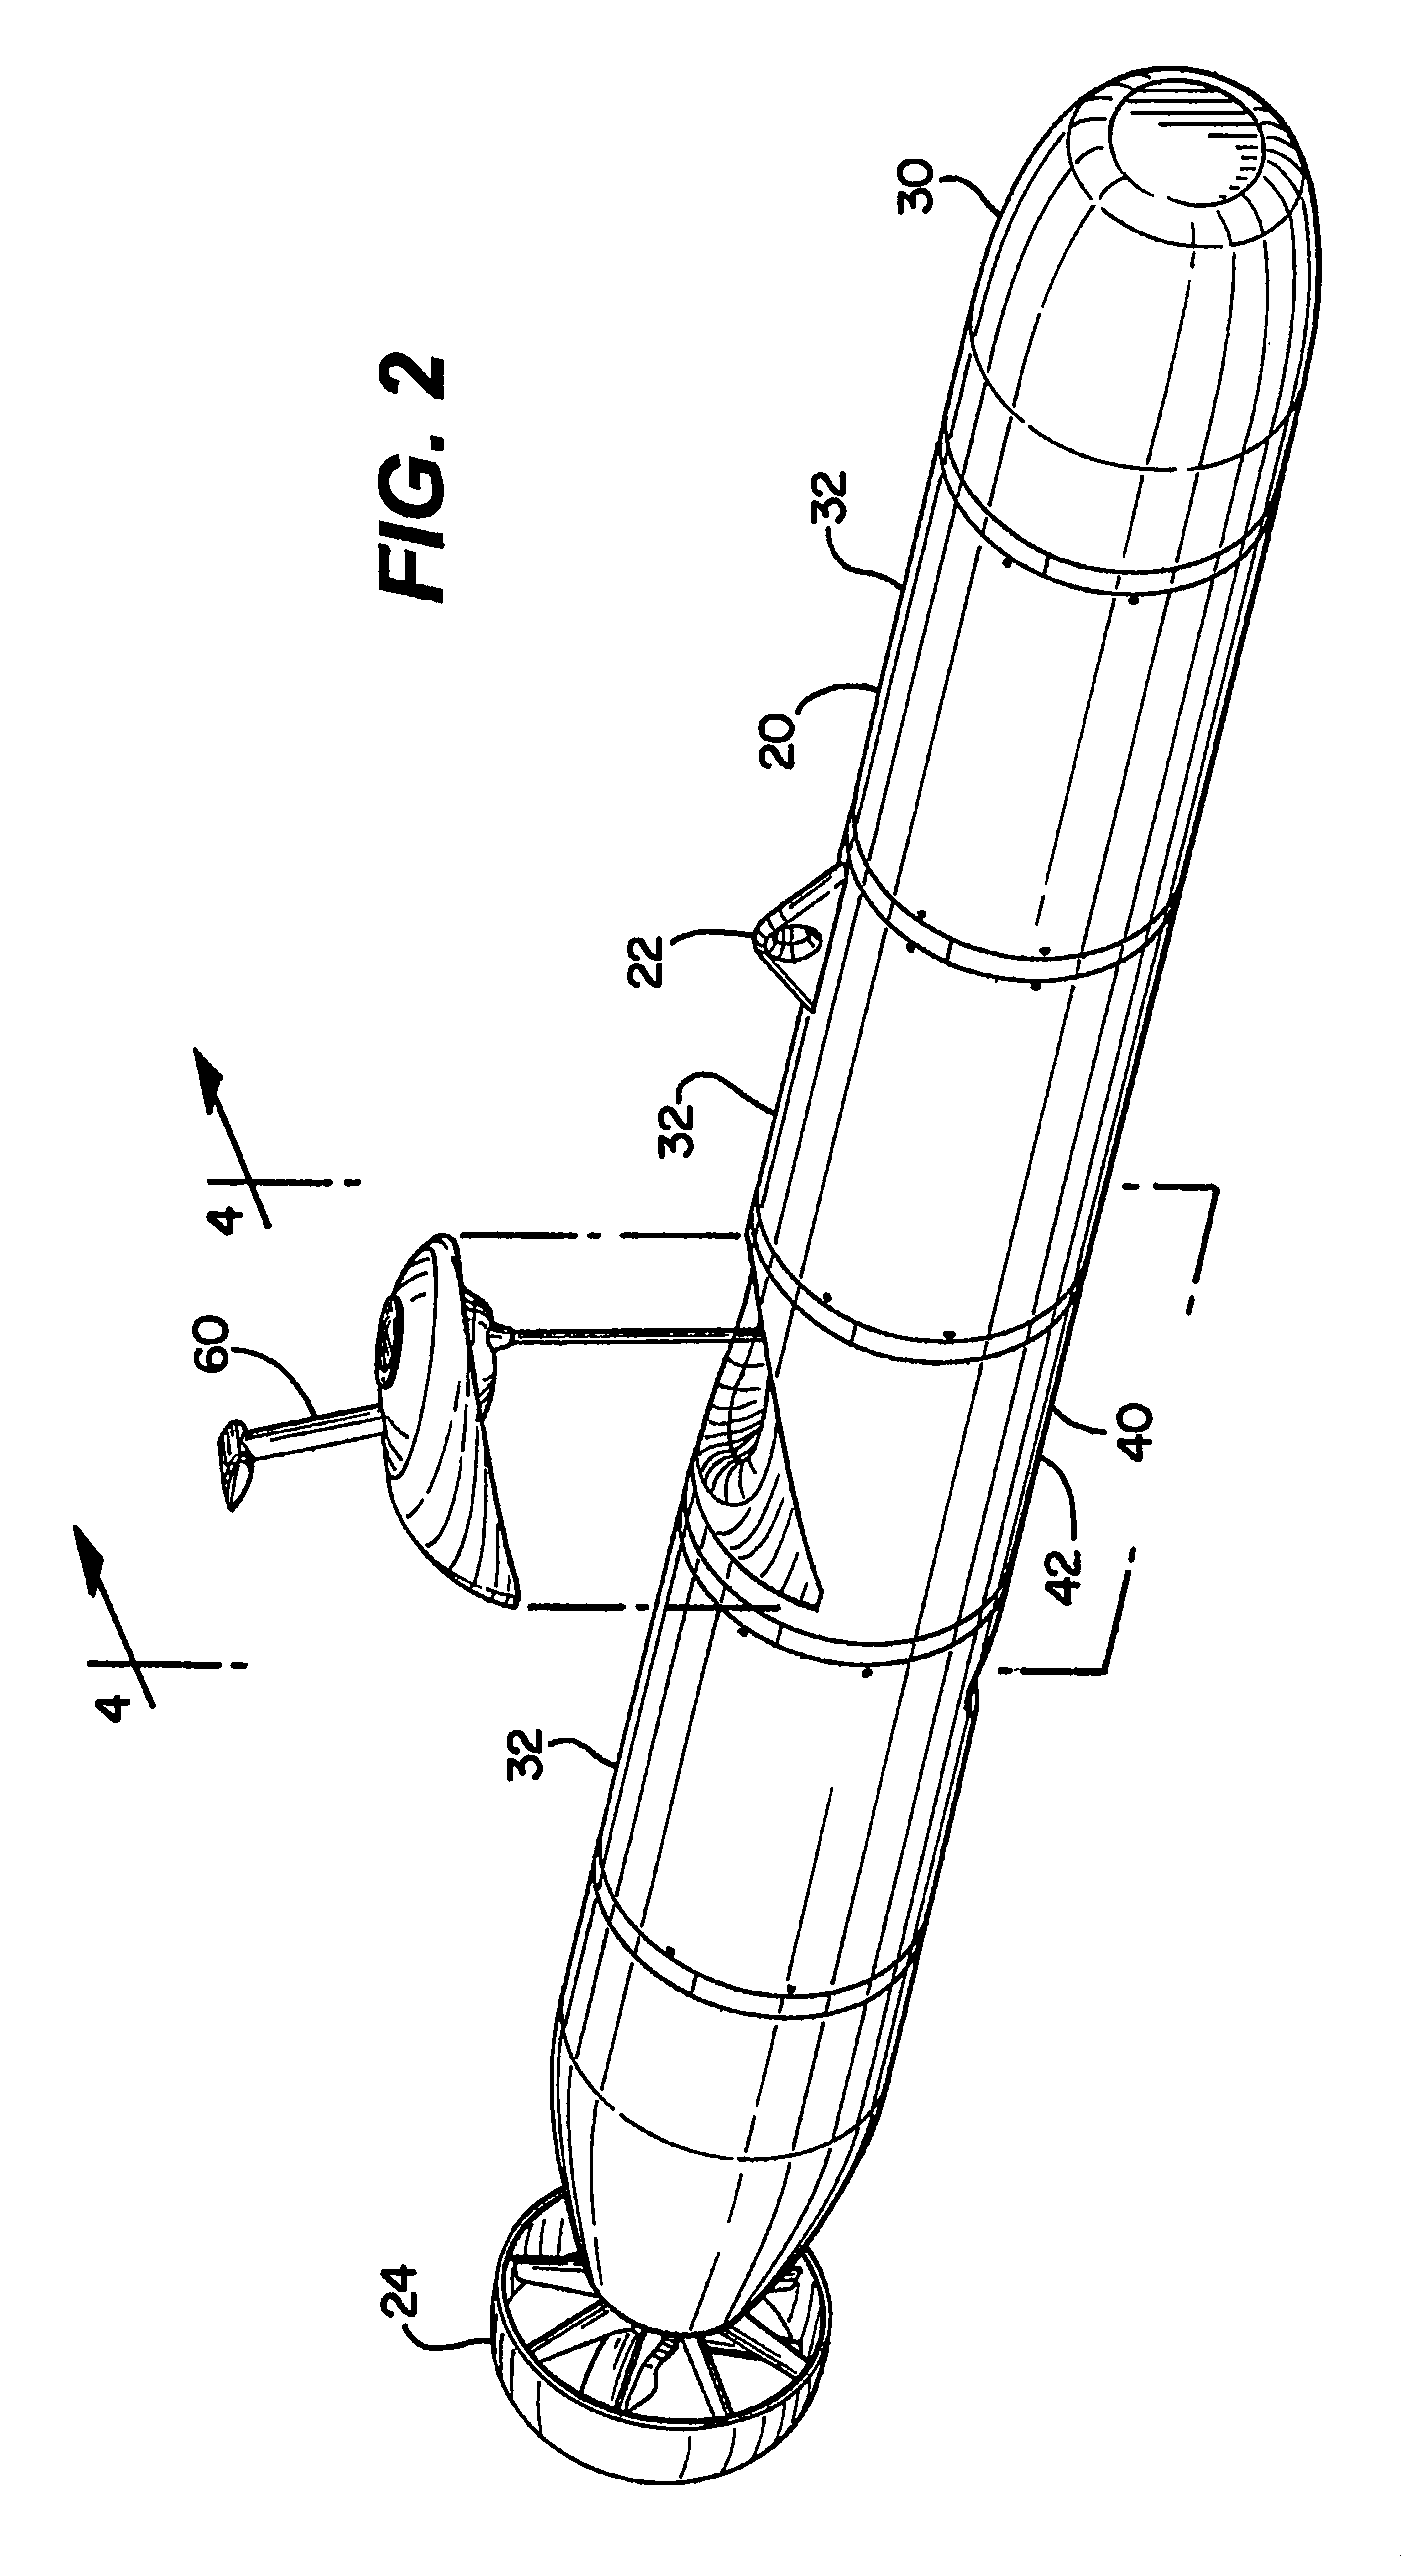 Towed antenna system and method